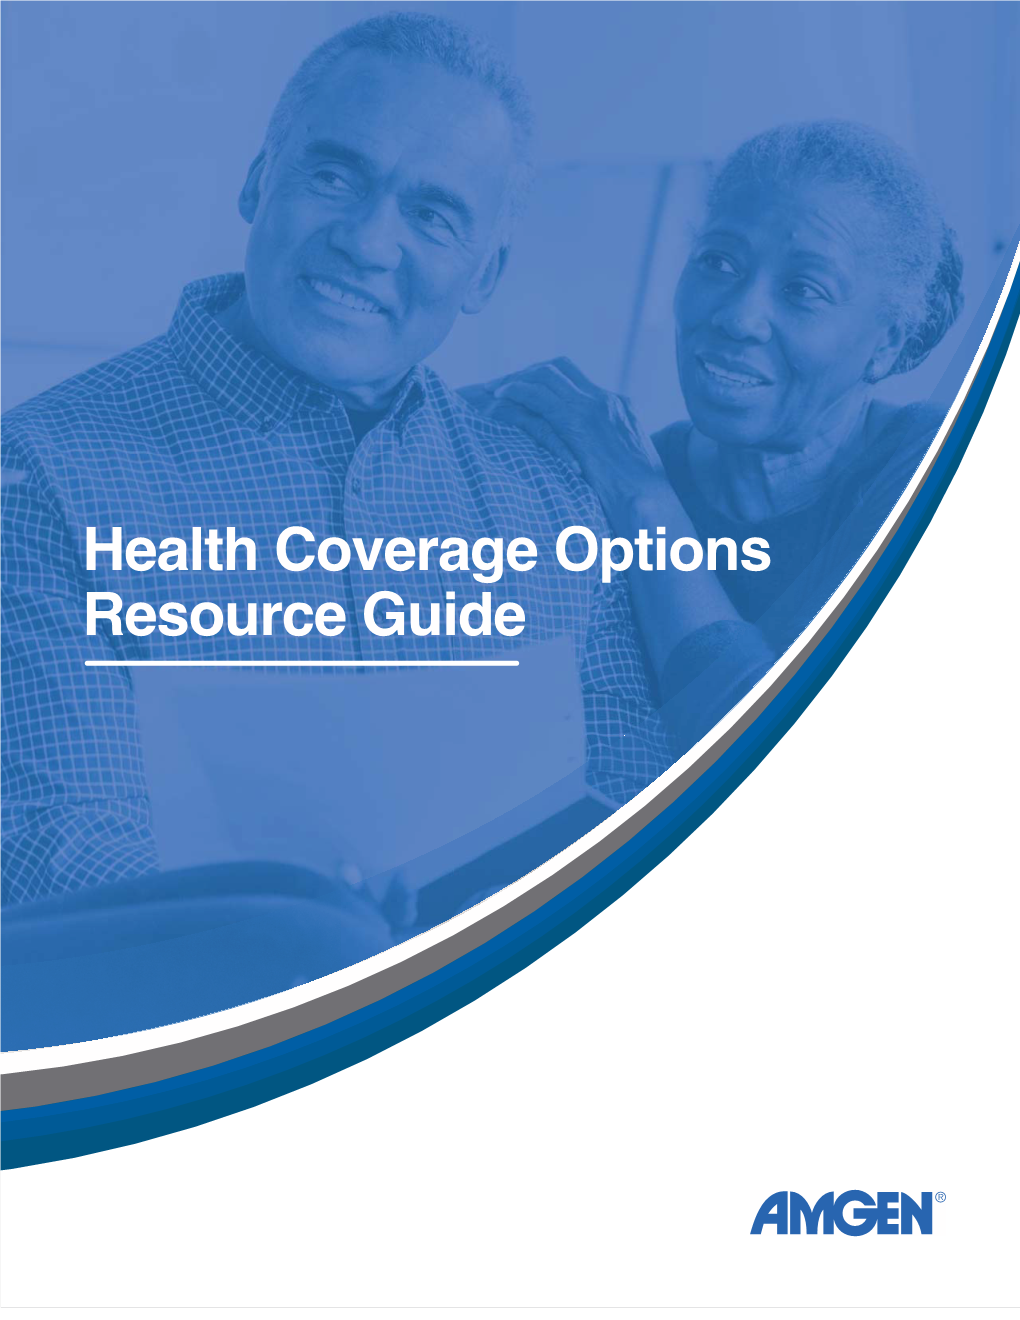 Health Coverage Options Resource Guide